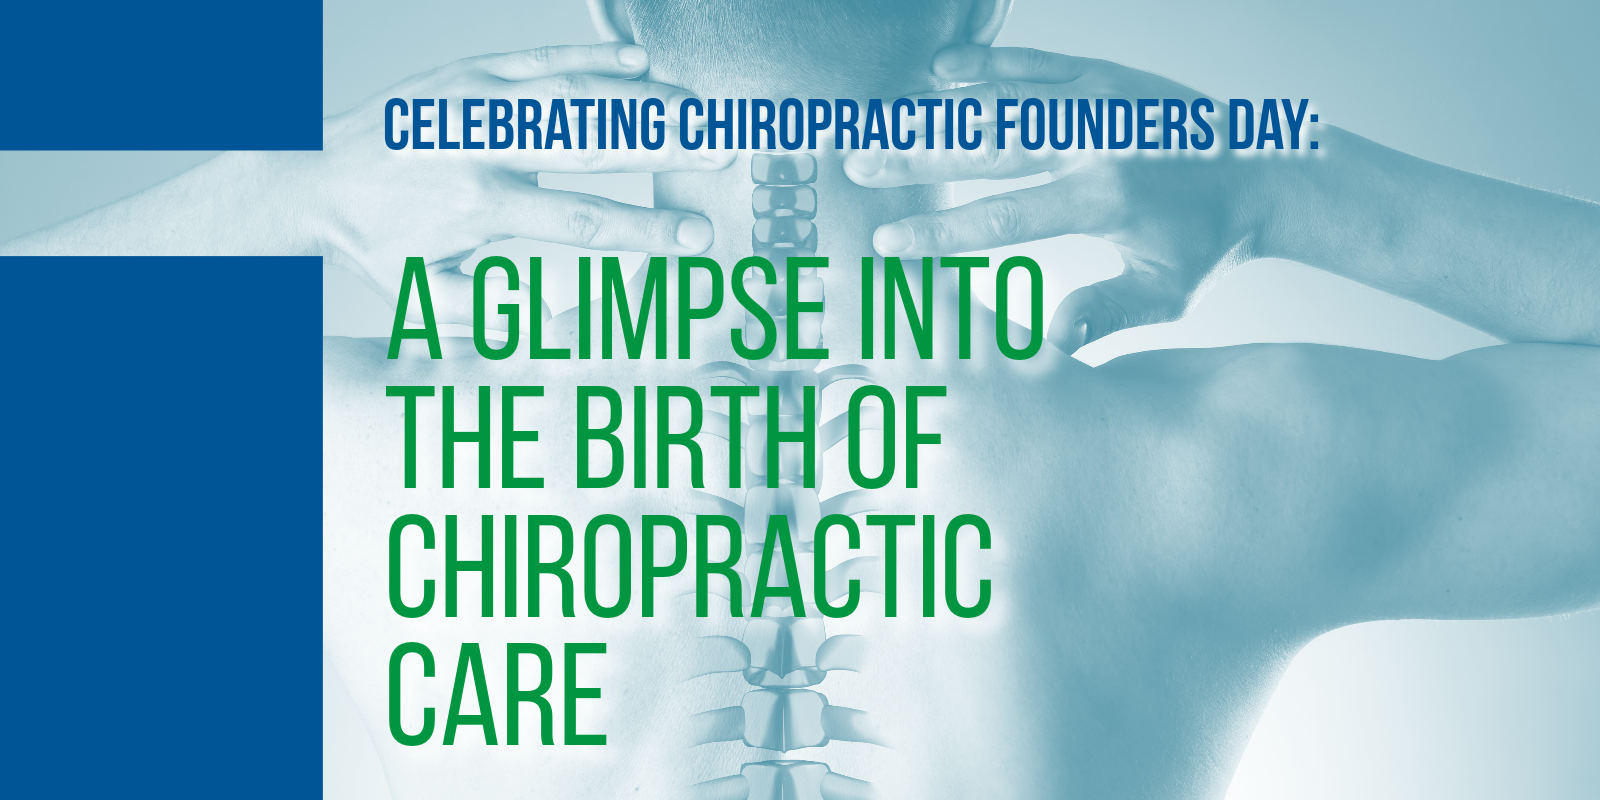 Chiropractic Founders Day